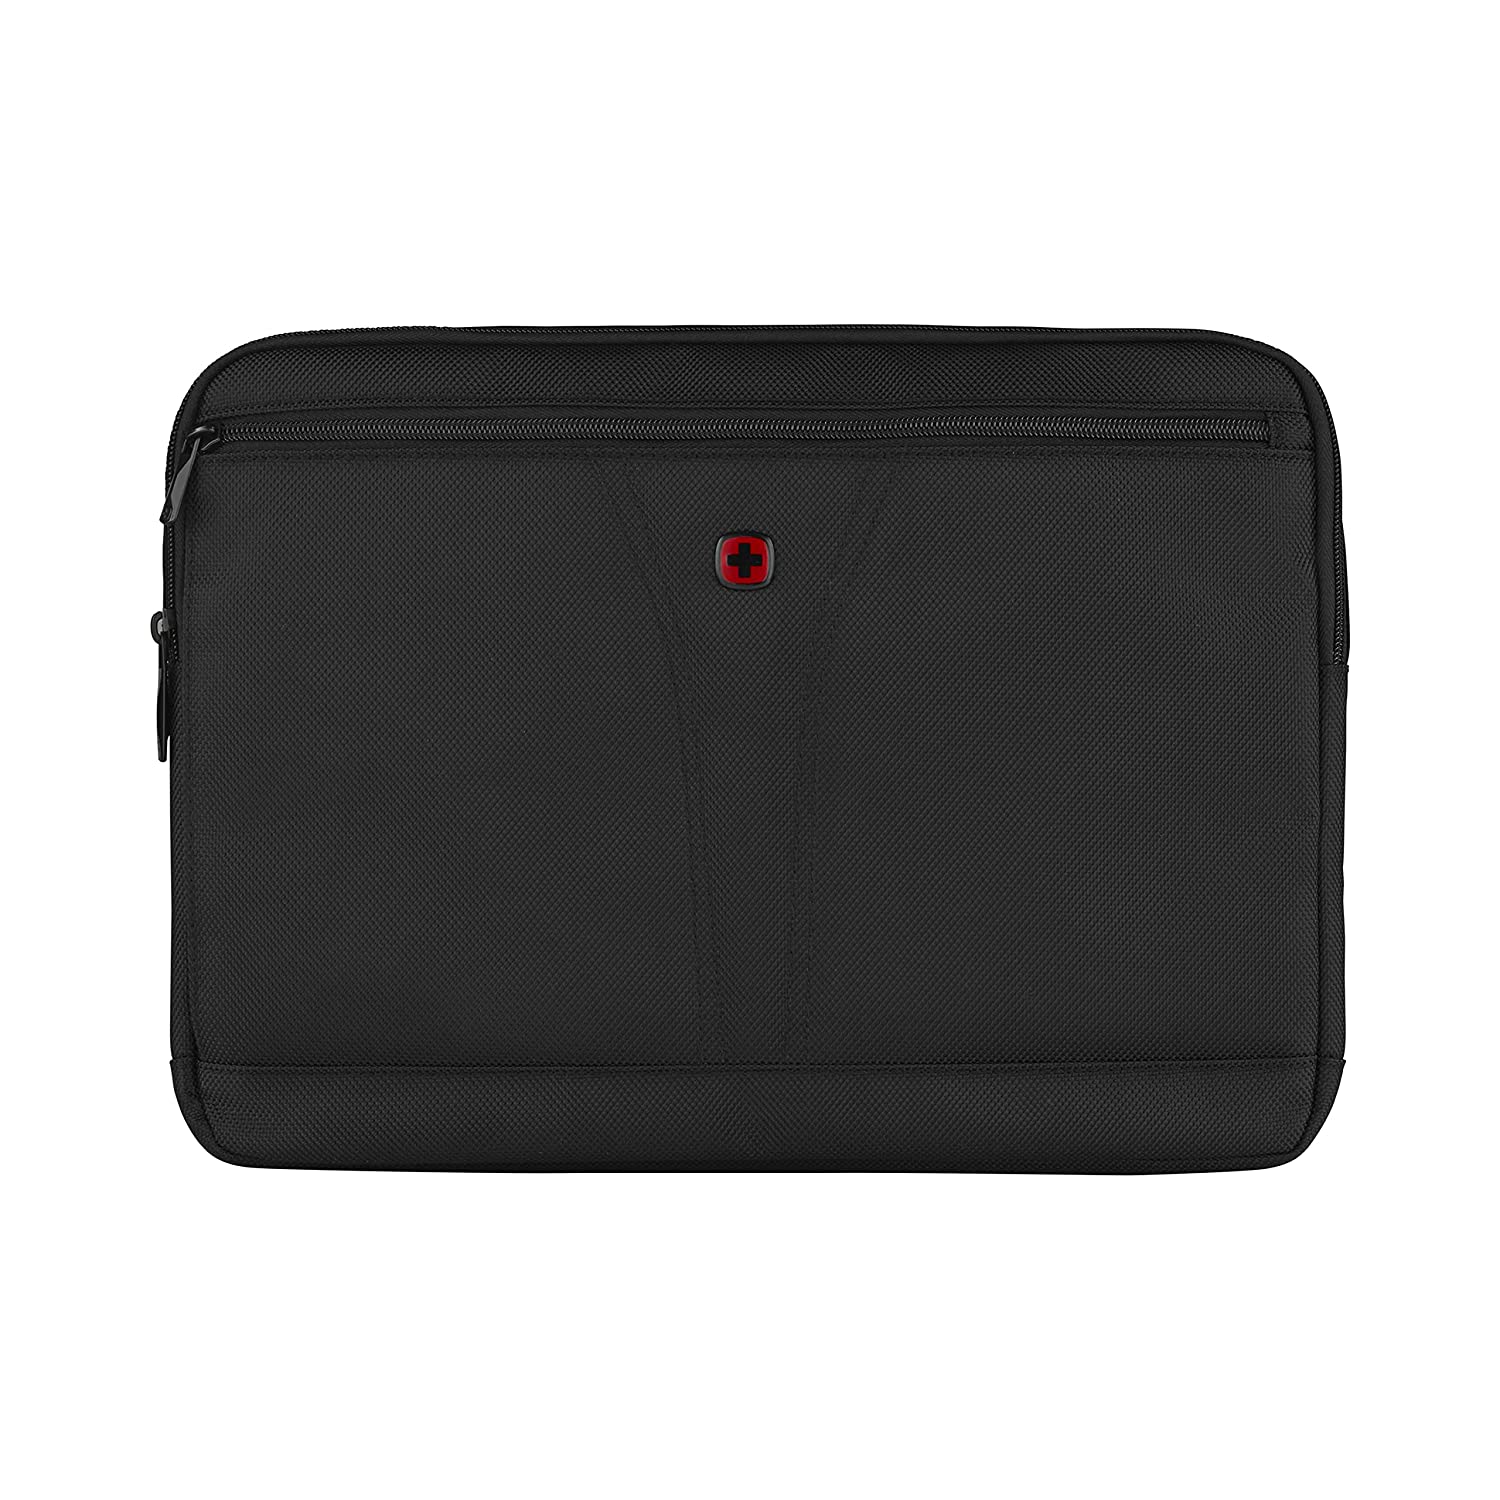 Wenger Bc Top 14 Inch Laptop Sleeve With Durable Ballistic Fabric